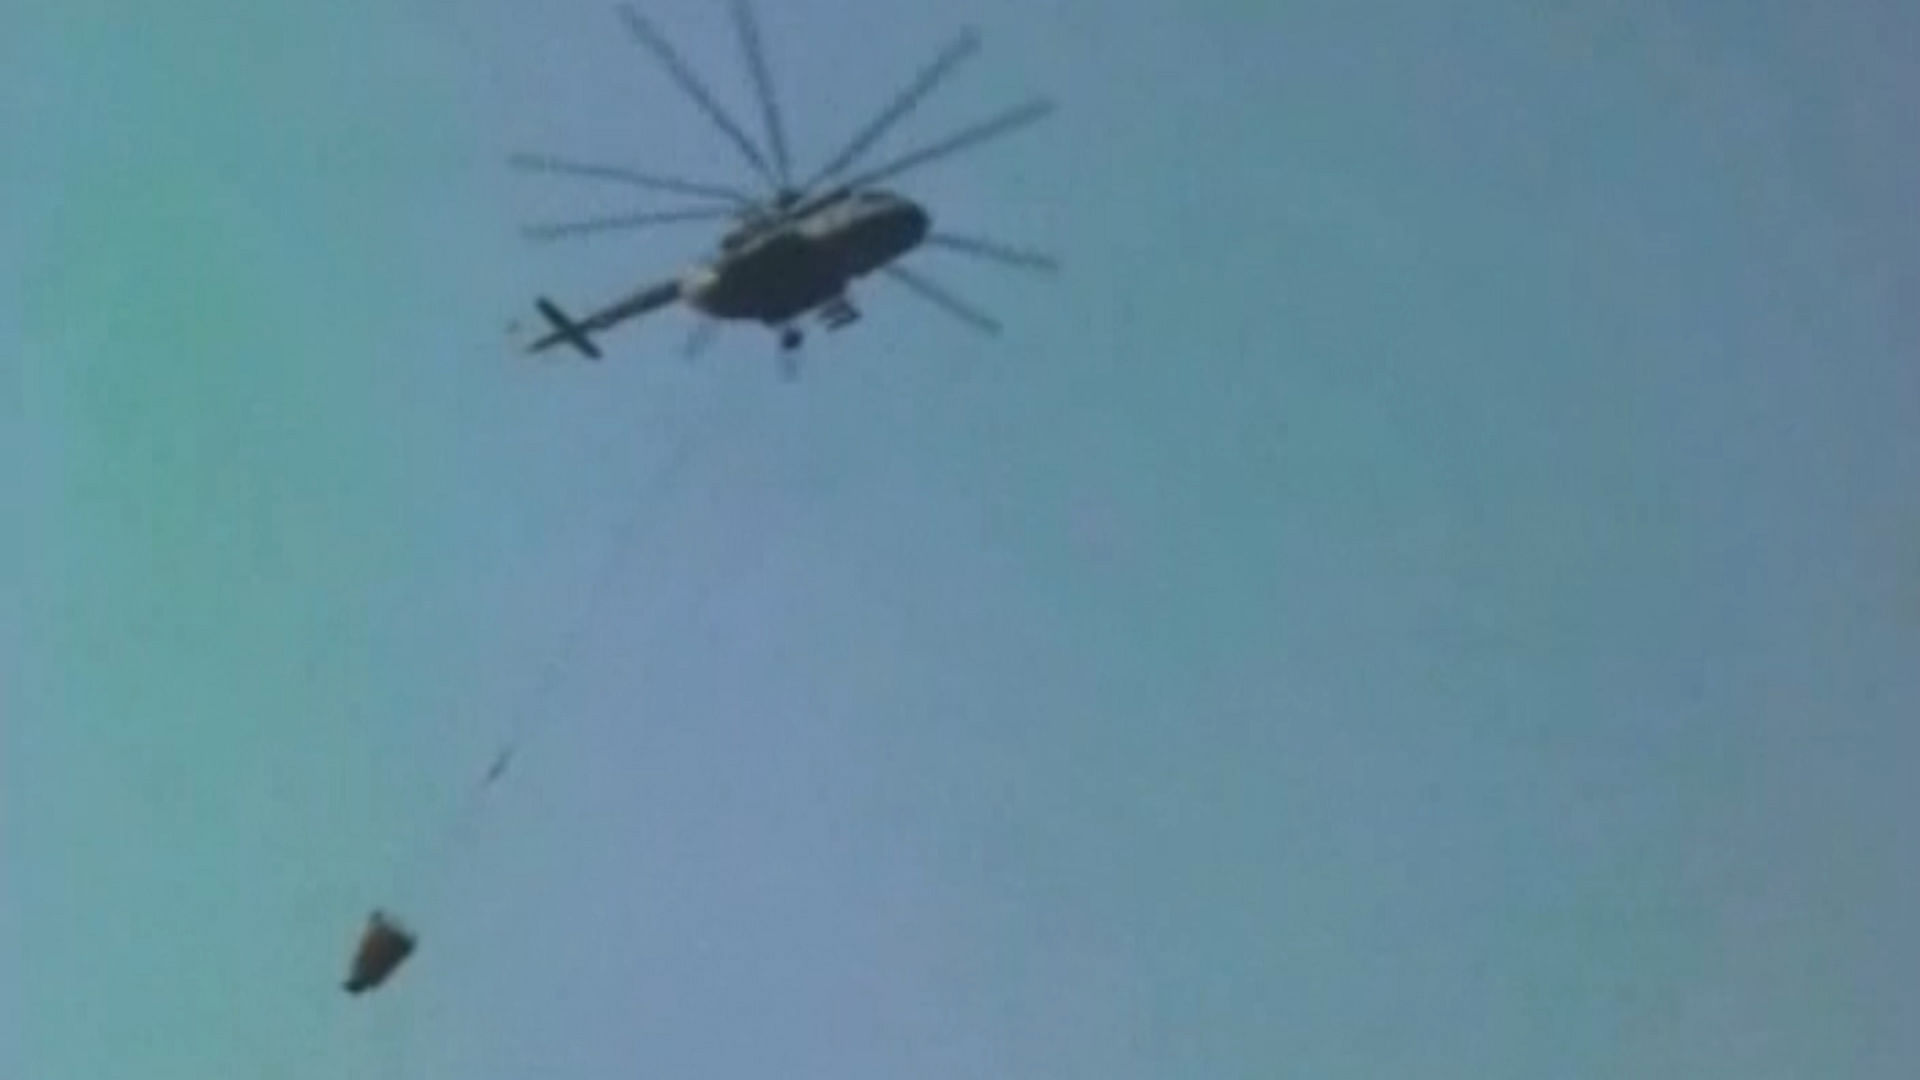 MI-17 helicopters spray water on Uttarakhand forest fires by lifting water from Bhimtal river using buckets. (Photo: ANI screengrab)